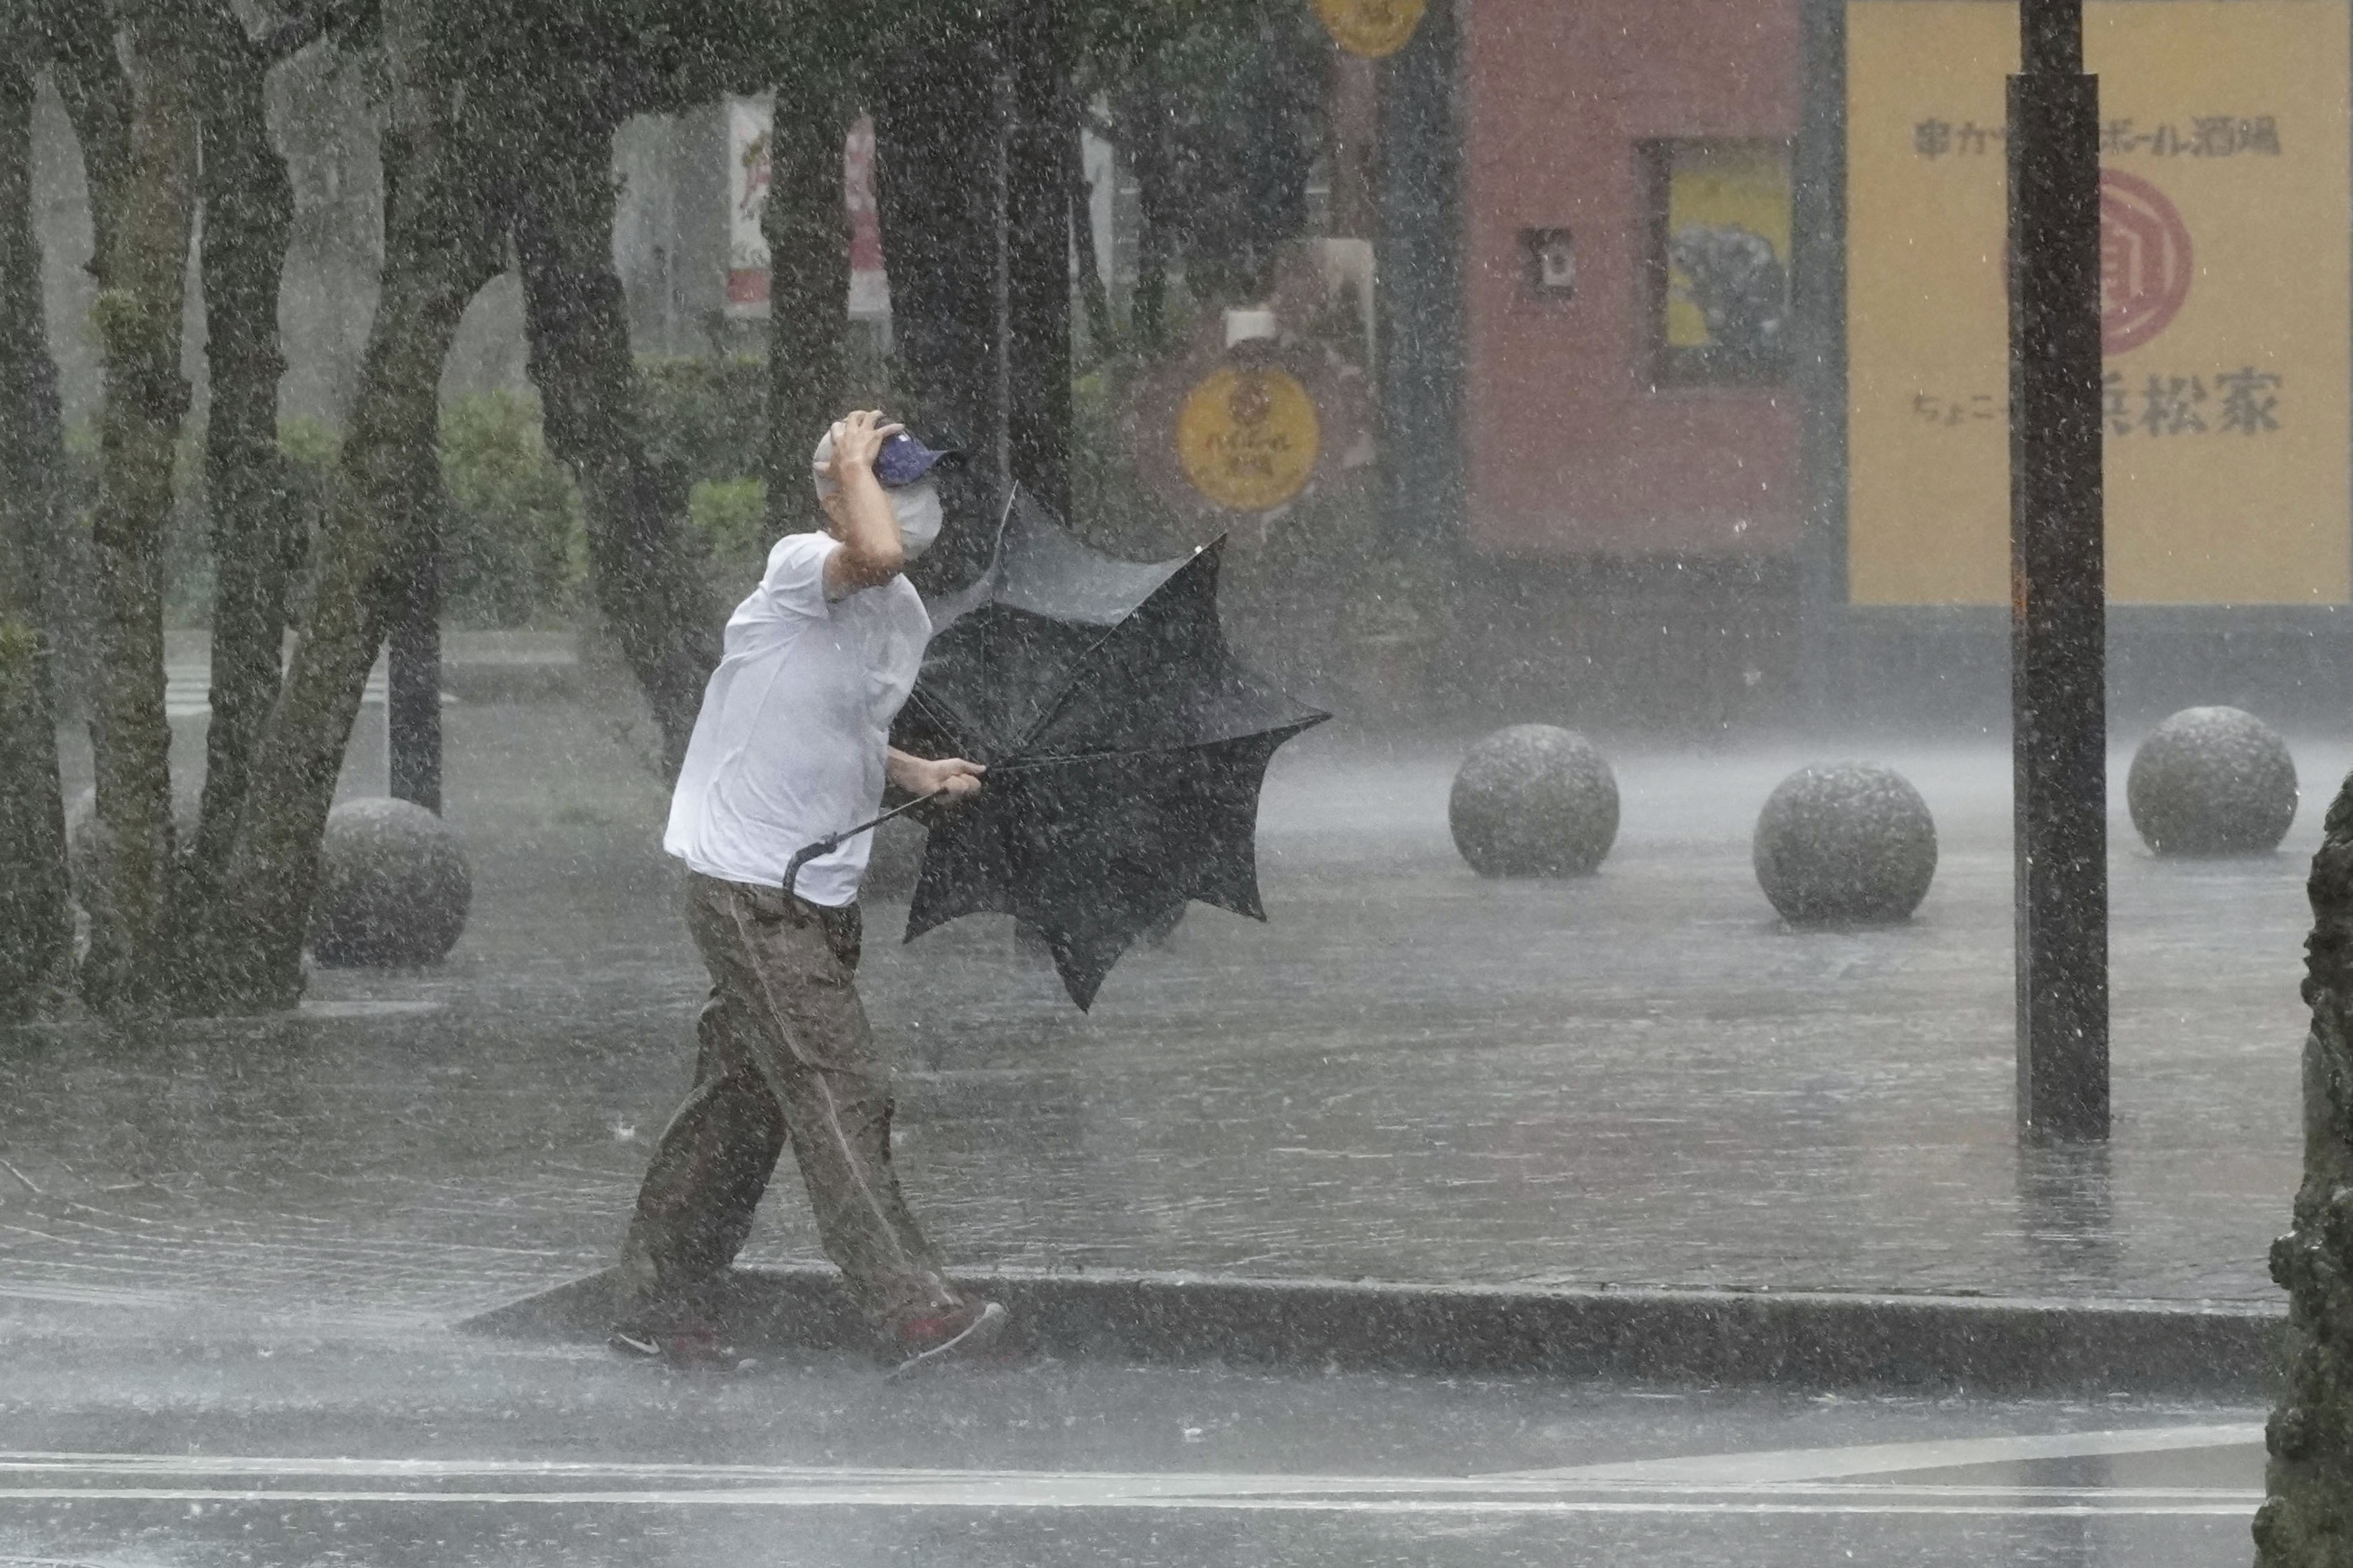 A man walks on the street in the heavy rain caused by Tropical Storm Meari in Hamamatsu, Japan